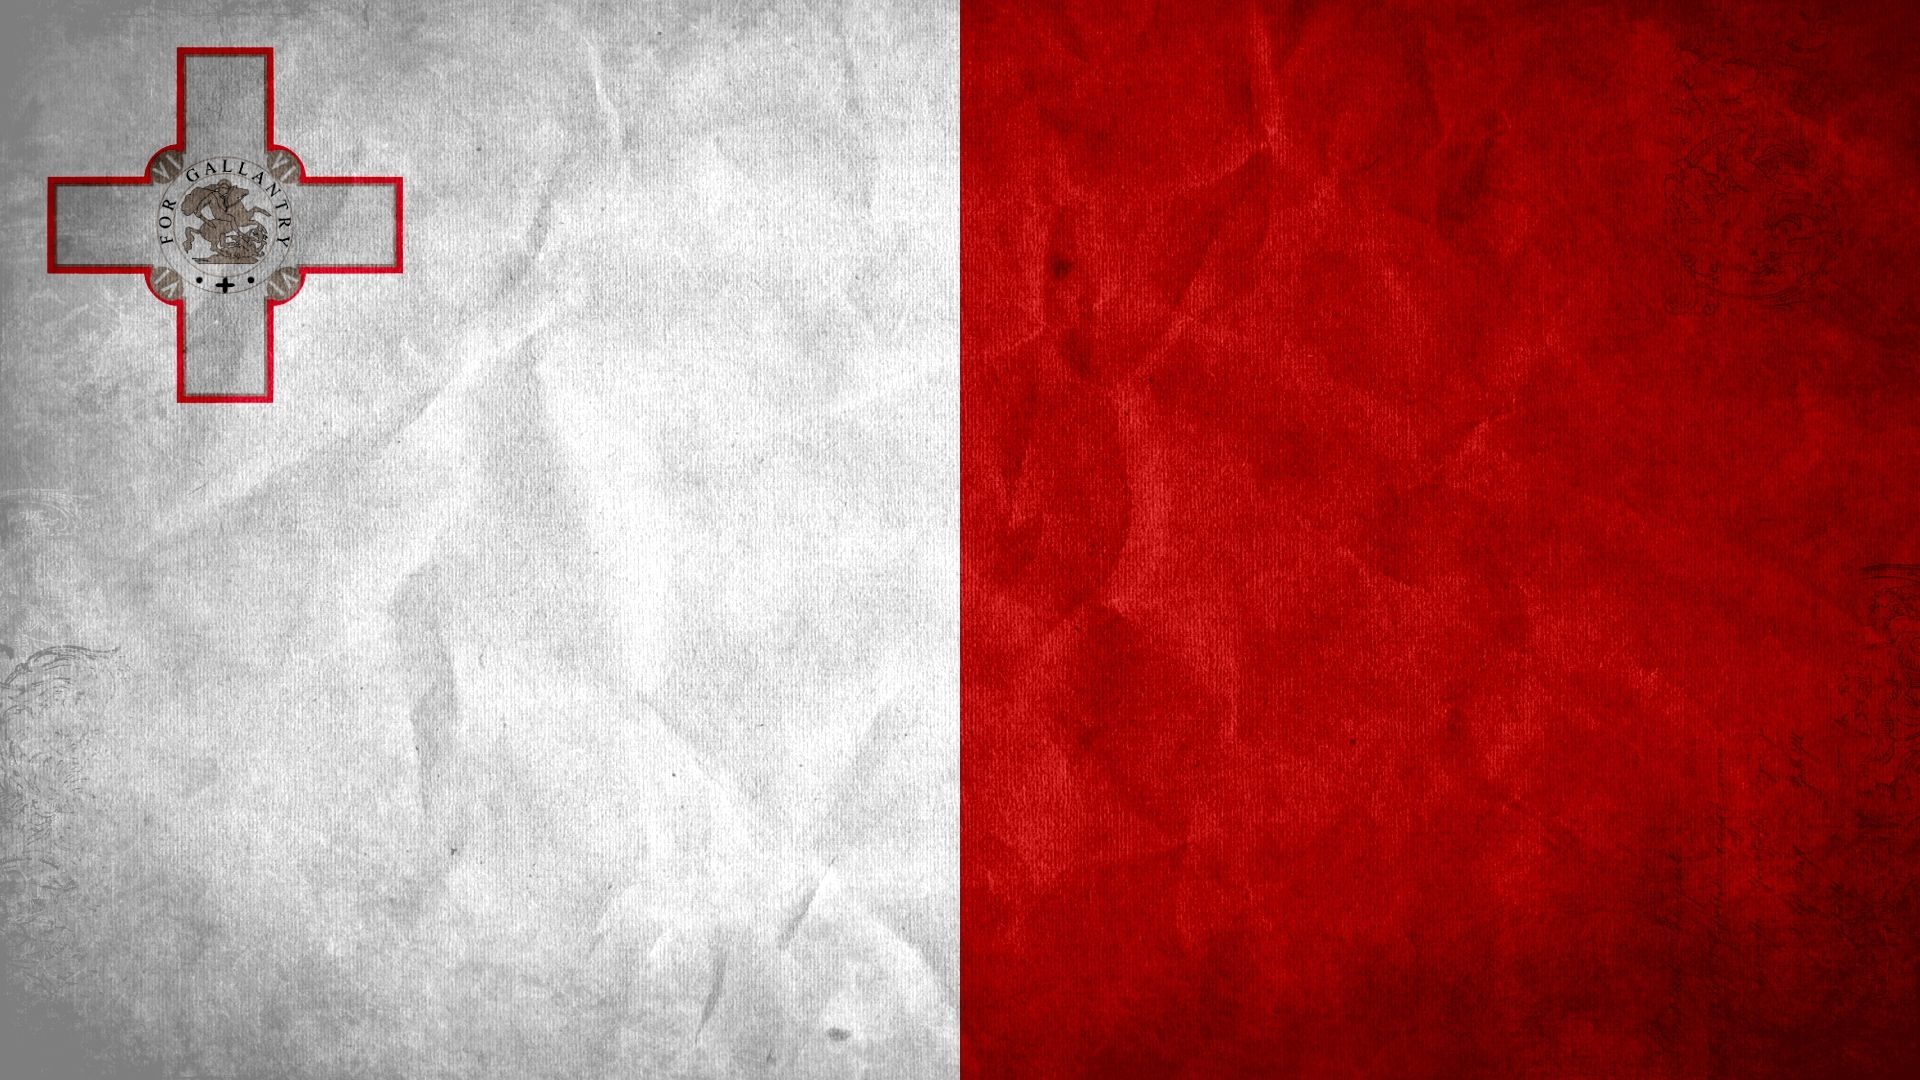 HD Wallpaper Of The Malta Country Flag Paperpull